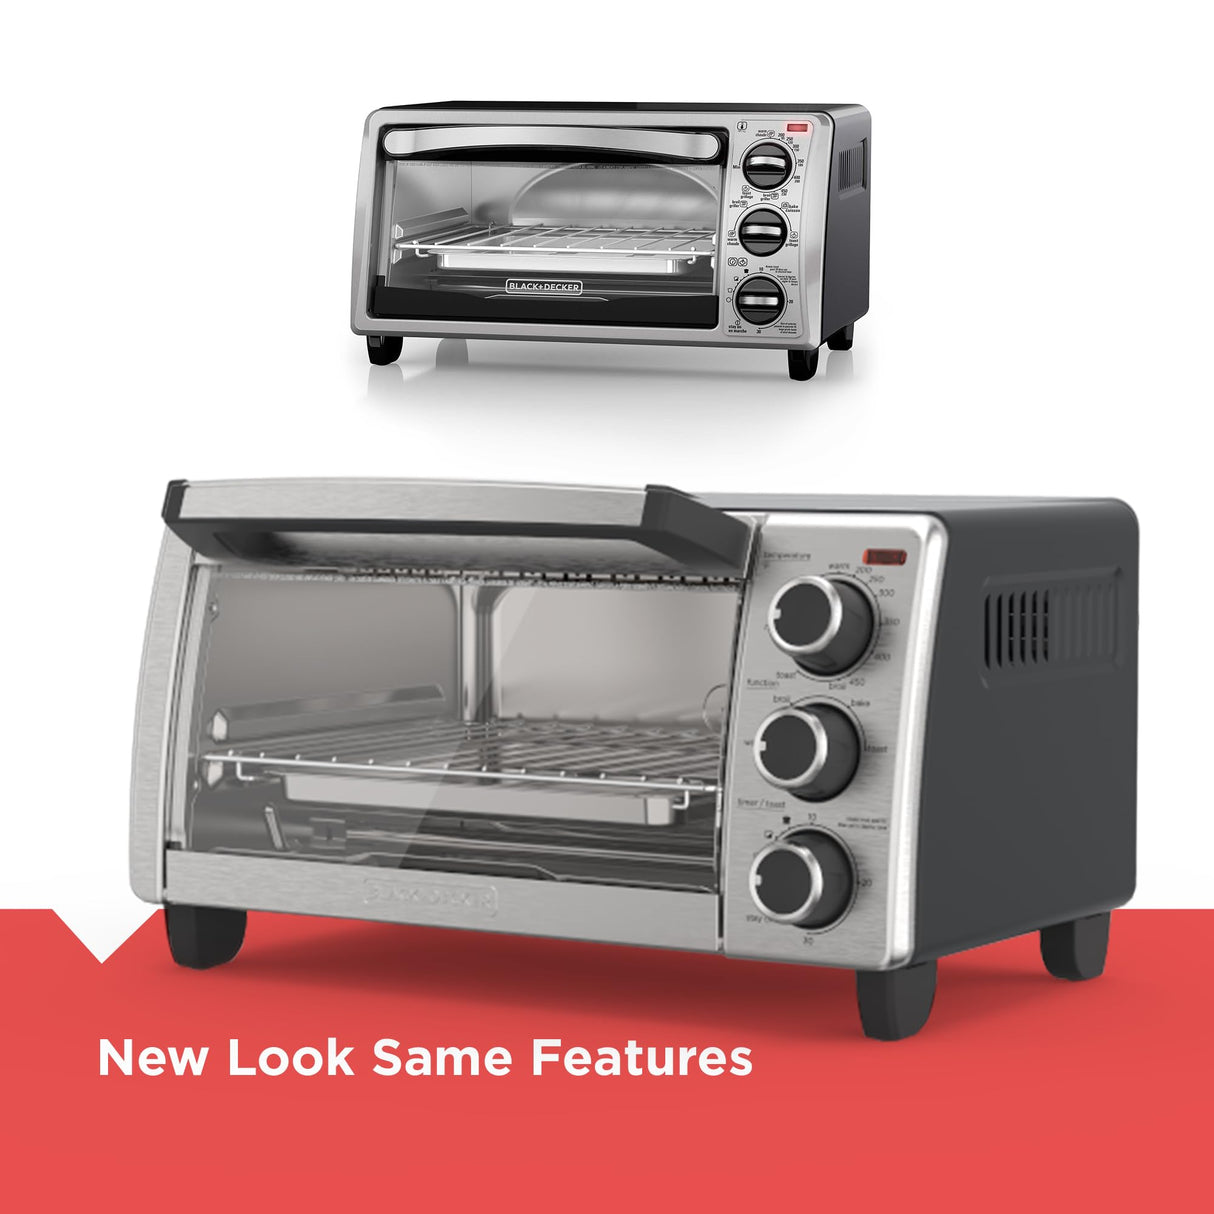 BLACK+DECKER 4-Slice Toaster Oven, TO1313SBD, Even Toast, 4 Cooking Functions Bake, Broil, Toast and Keep Warm, Removable Crumb Tray, Timer